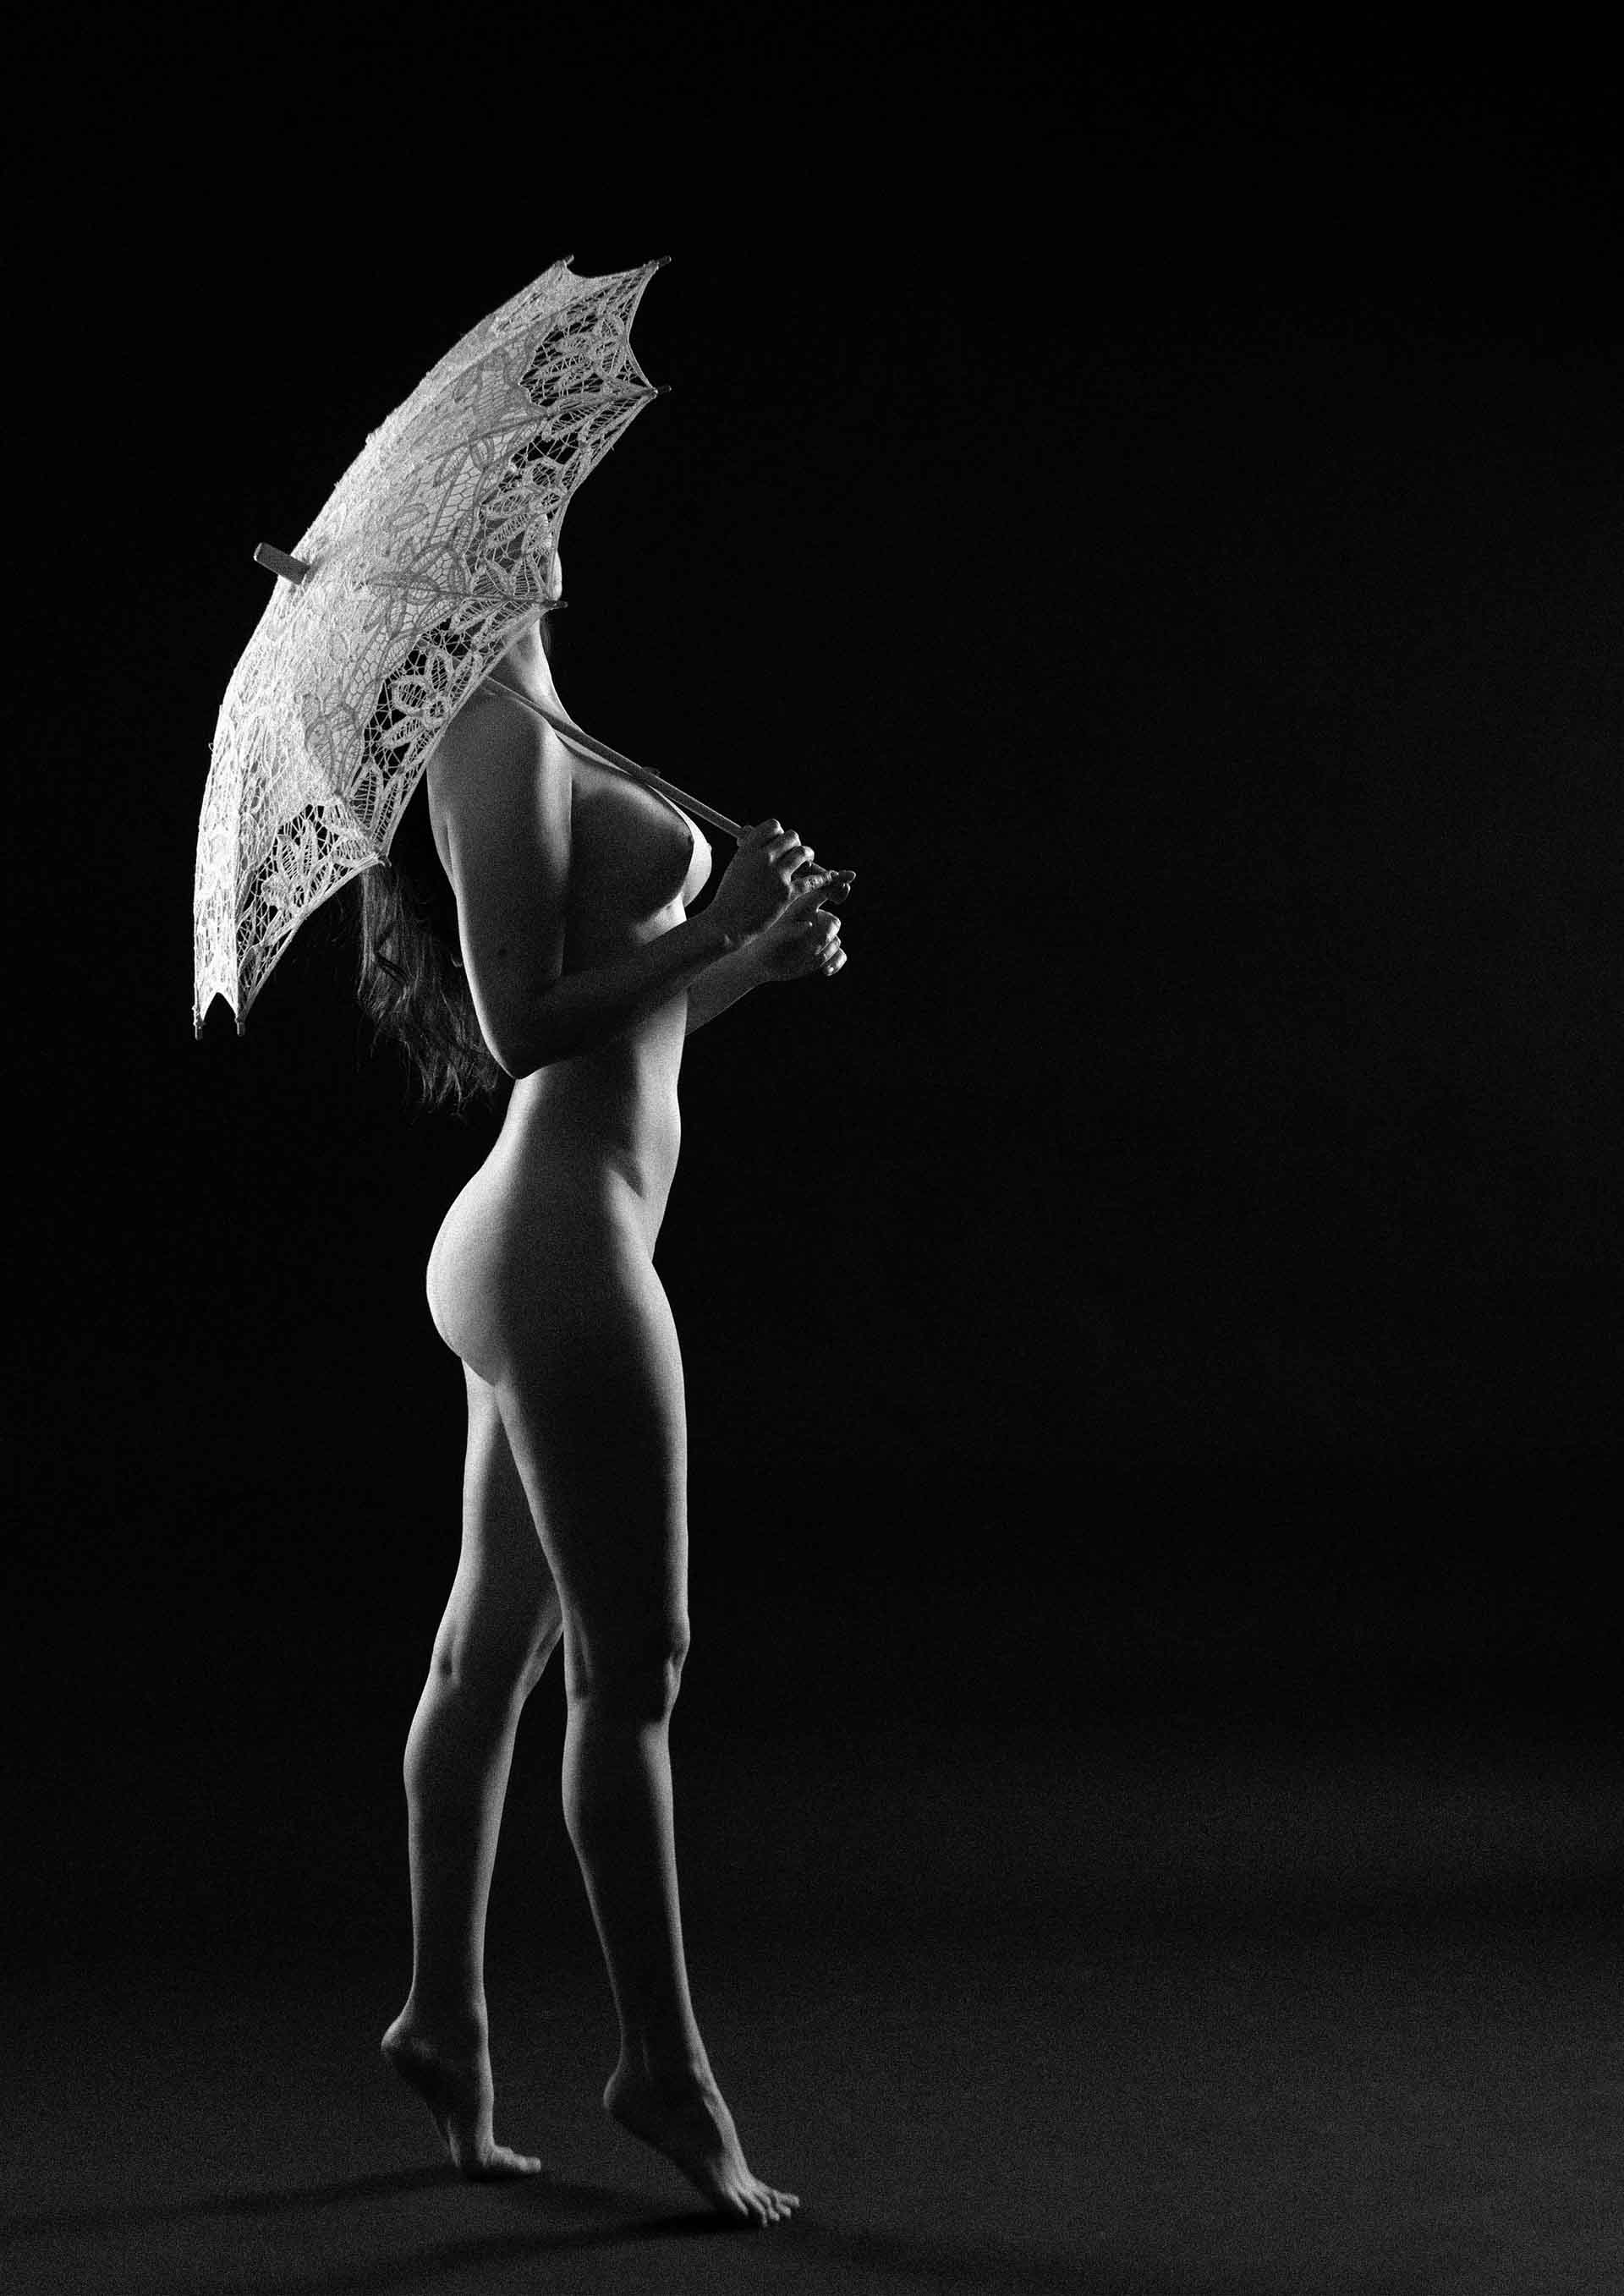 Black and white artistic photography of a nude figure under an lace parasol, by Juan Pablo Galguera